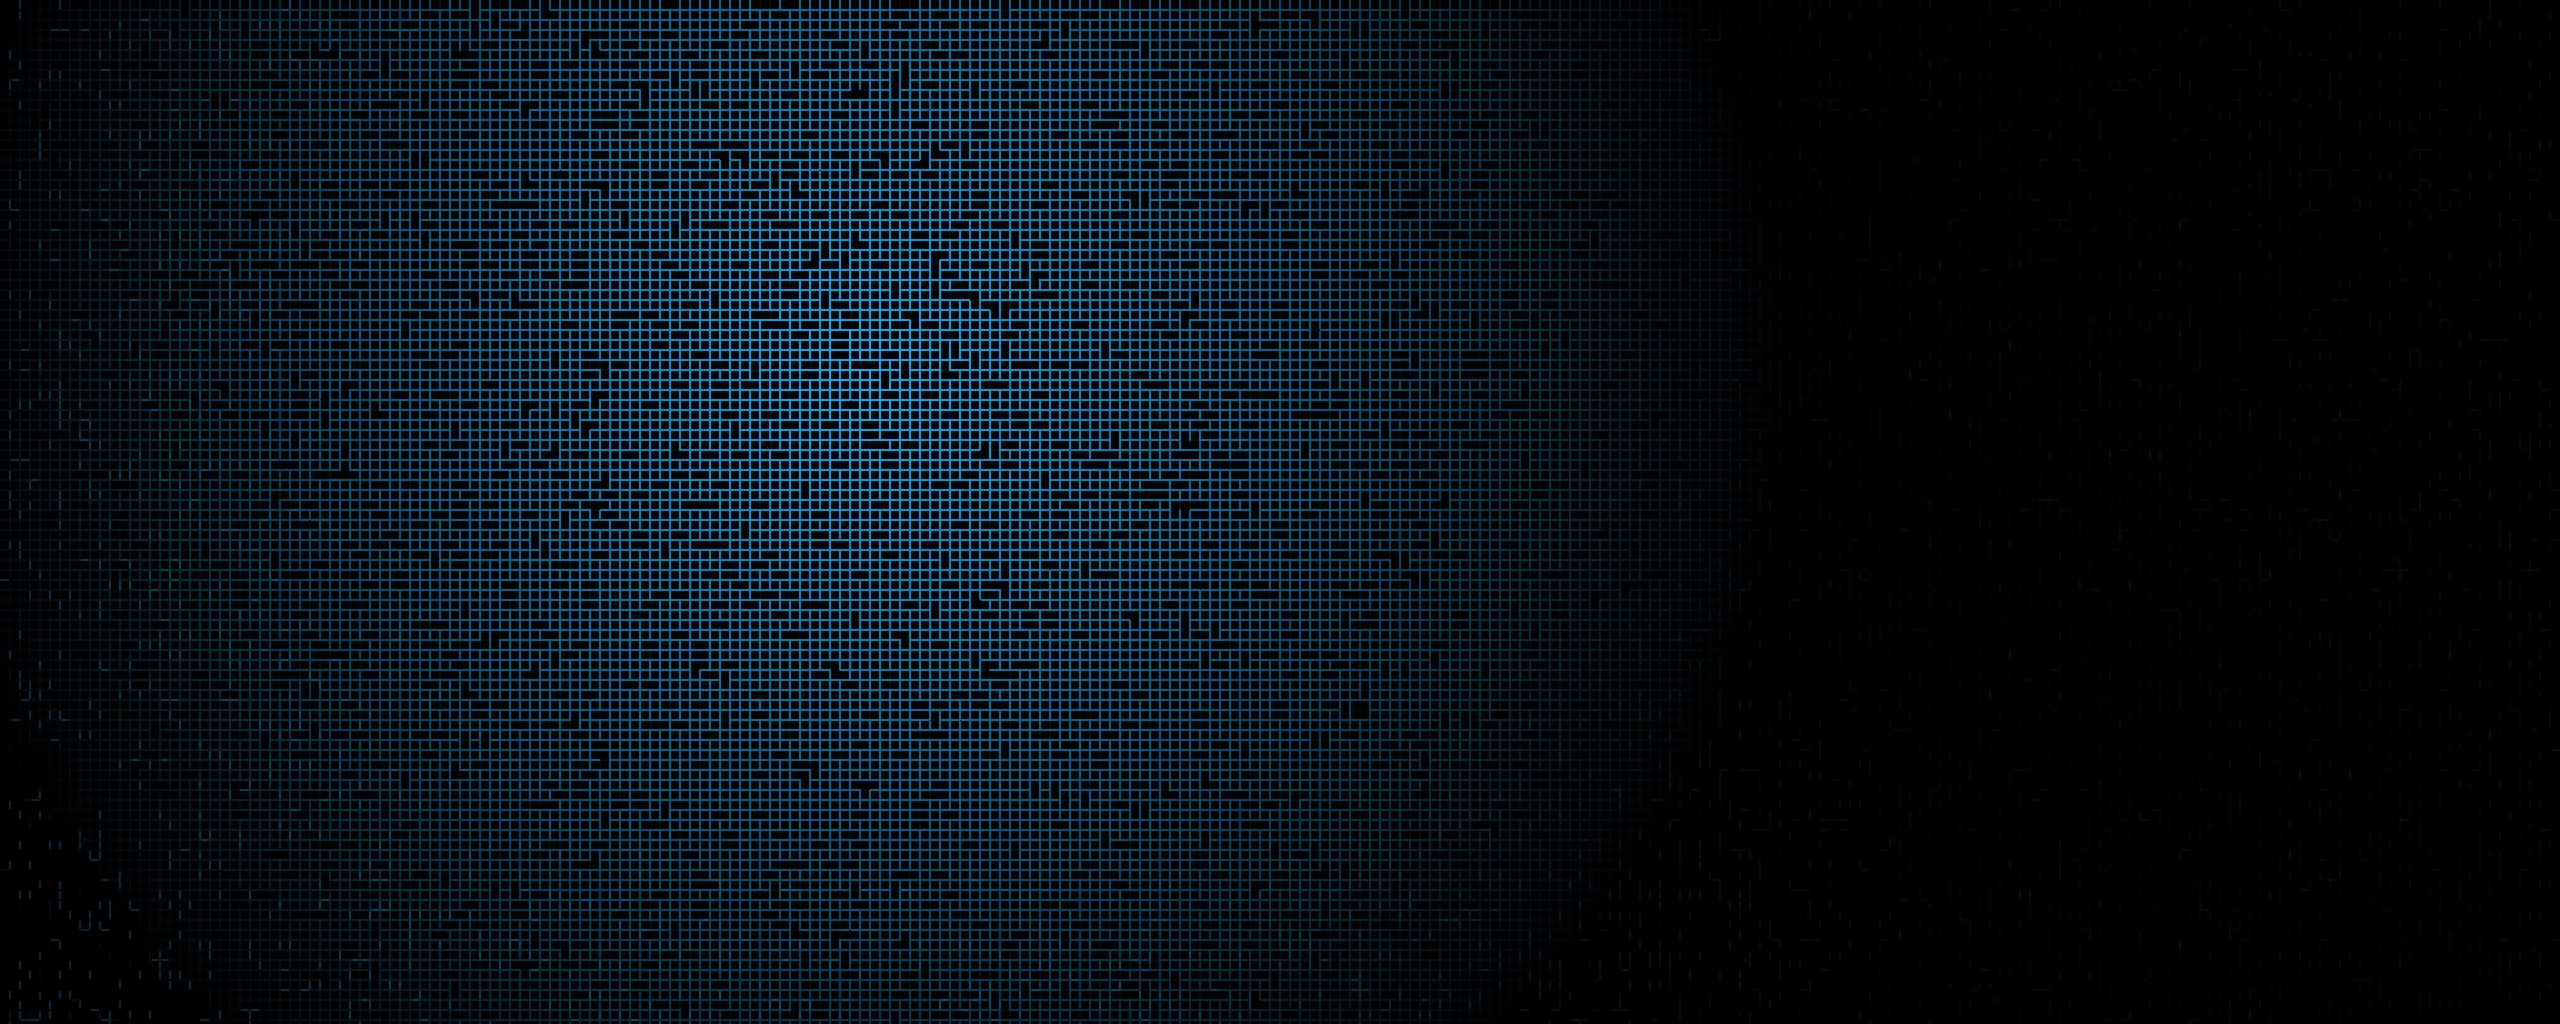 10 New Blue And Black Wallpaper Hd FULL HD 1920×1080 For PC Background 2023